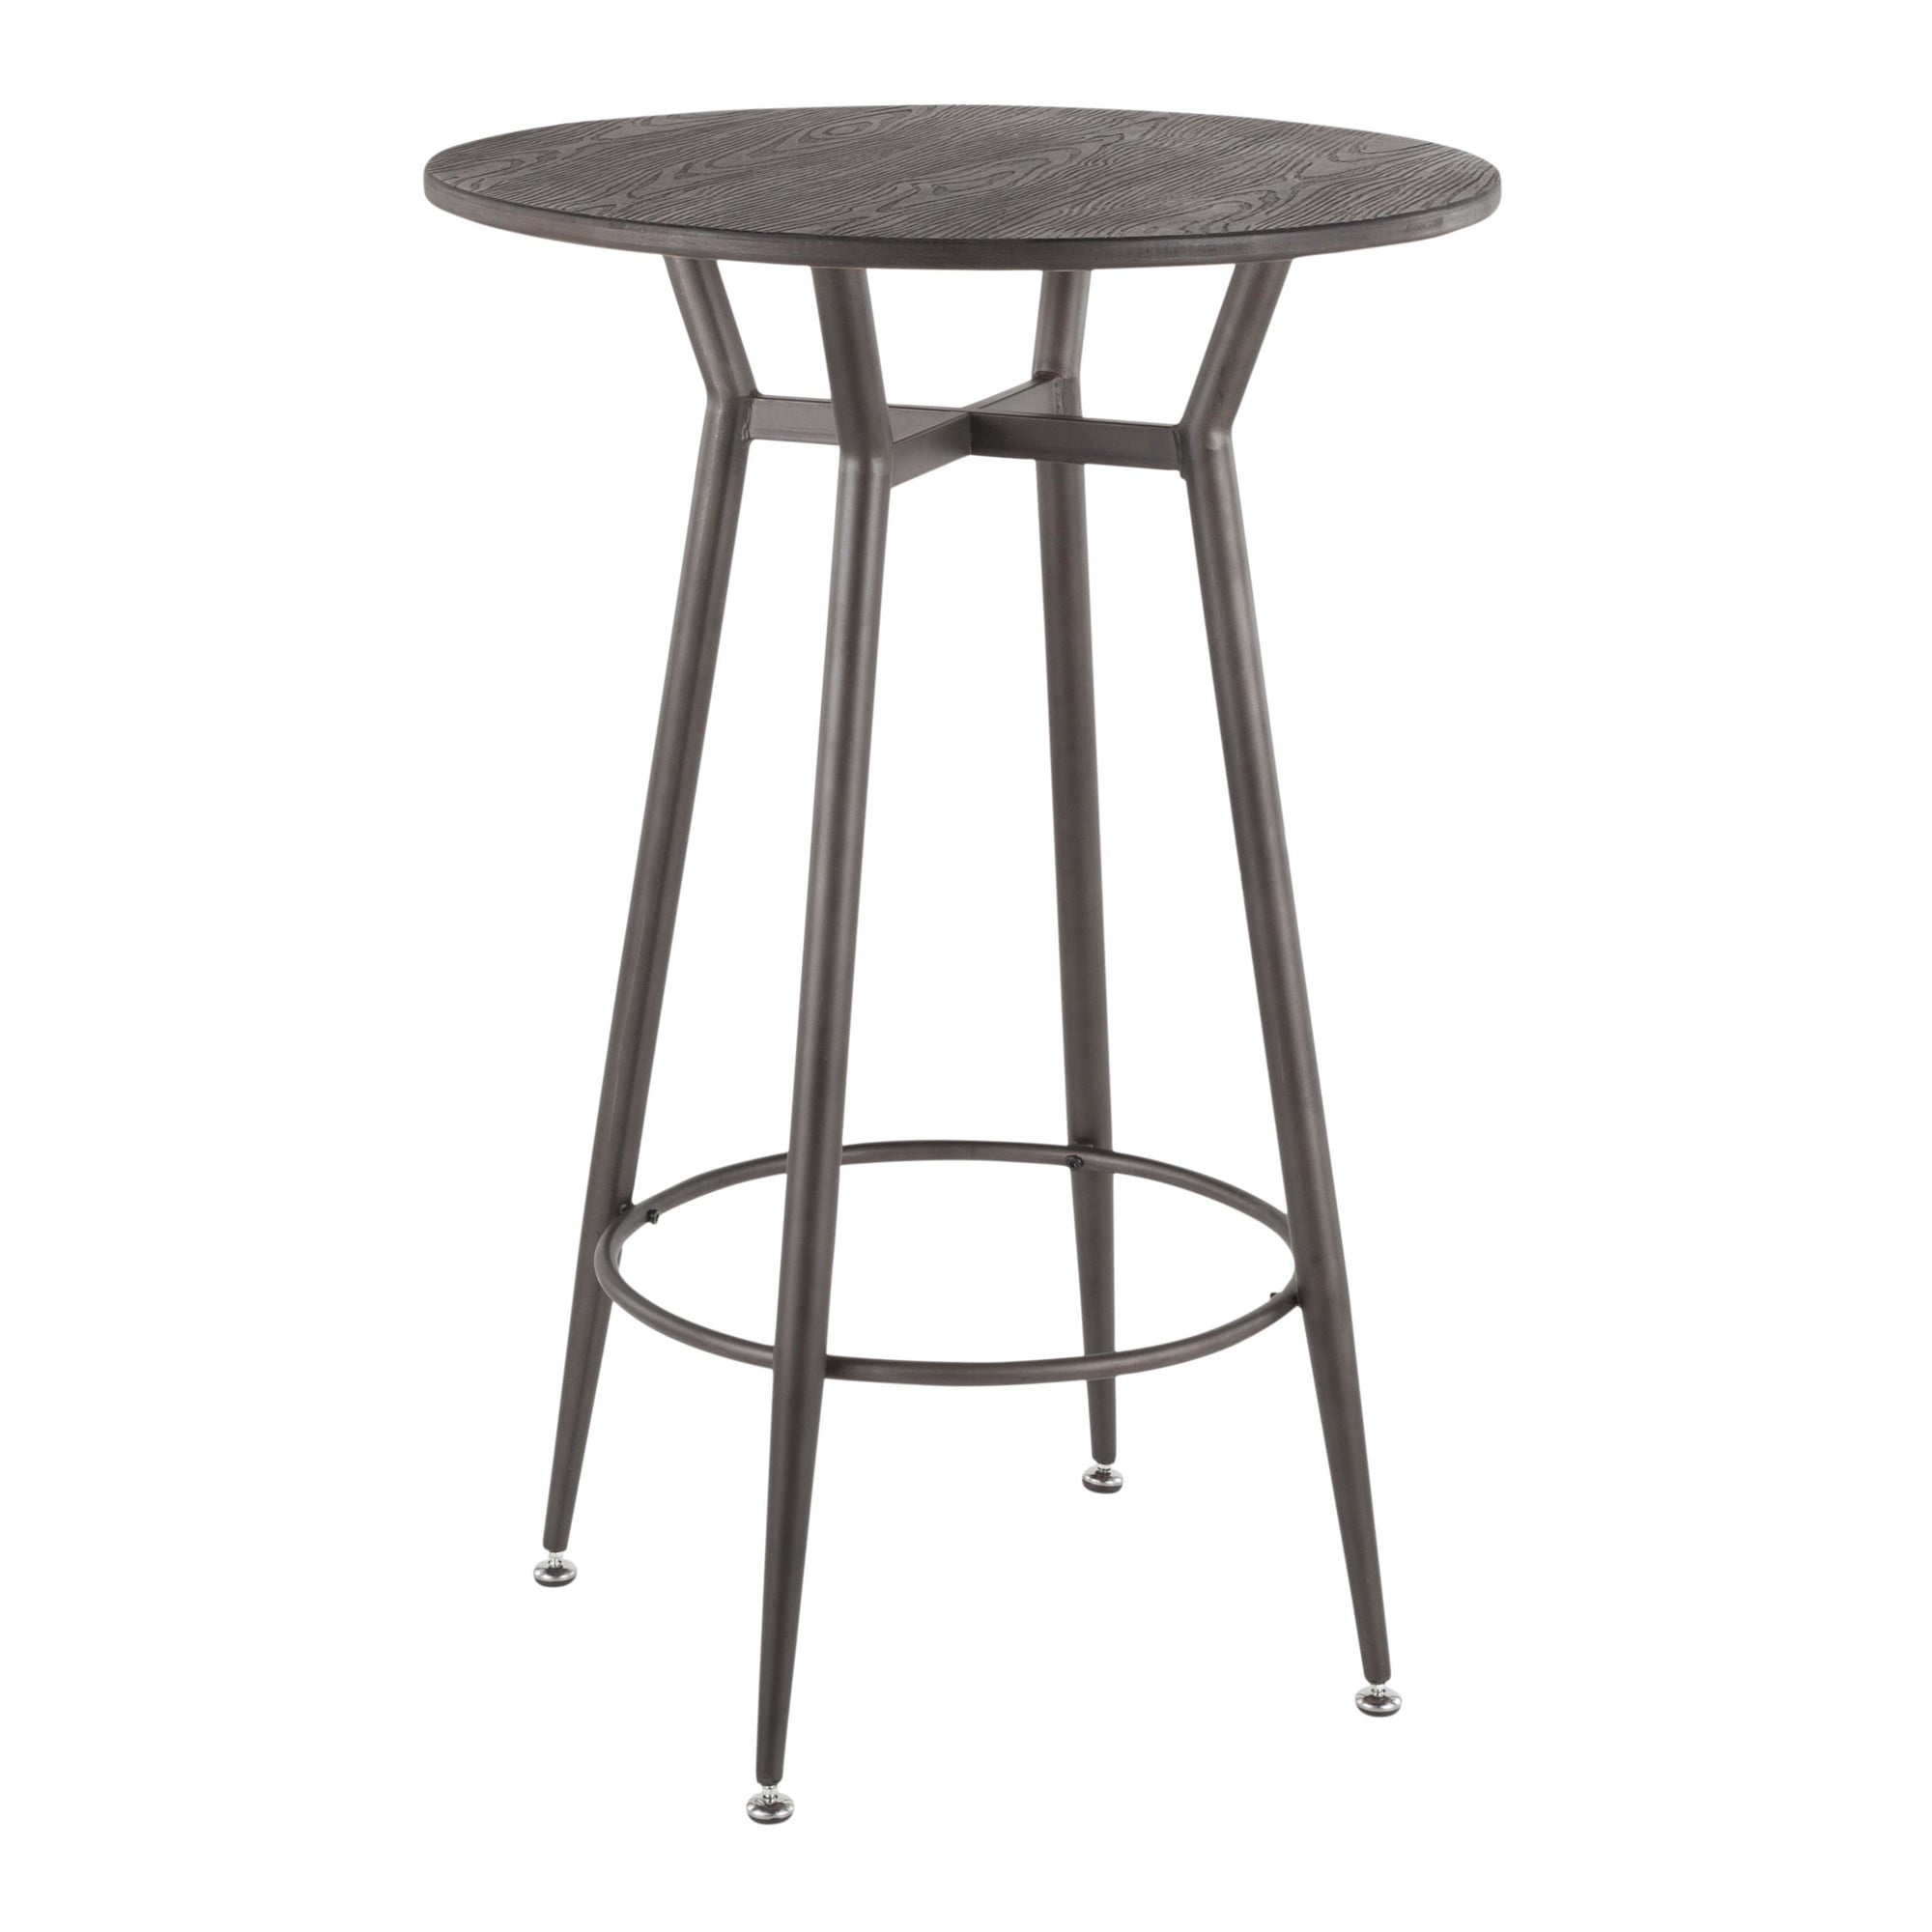 Clara Industrial Round Bar Table in Antique Metal with Espresso Wood ...